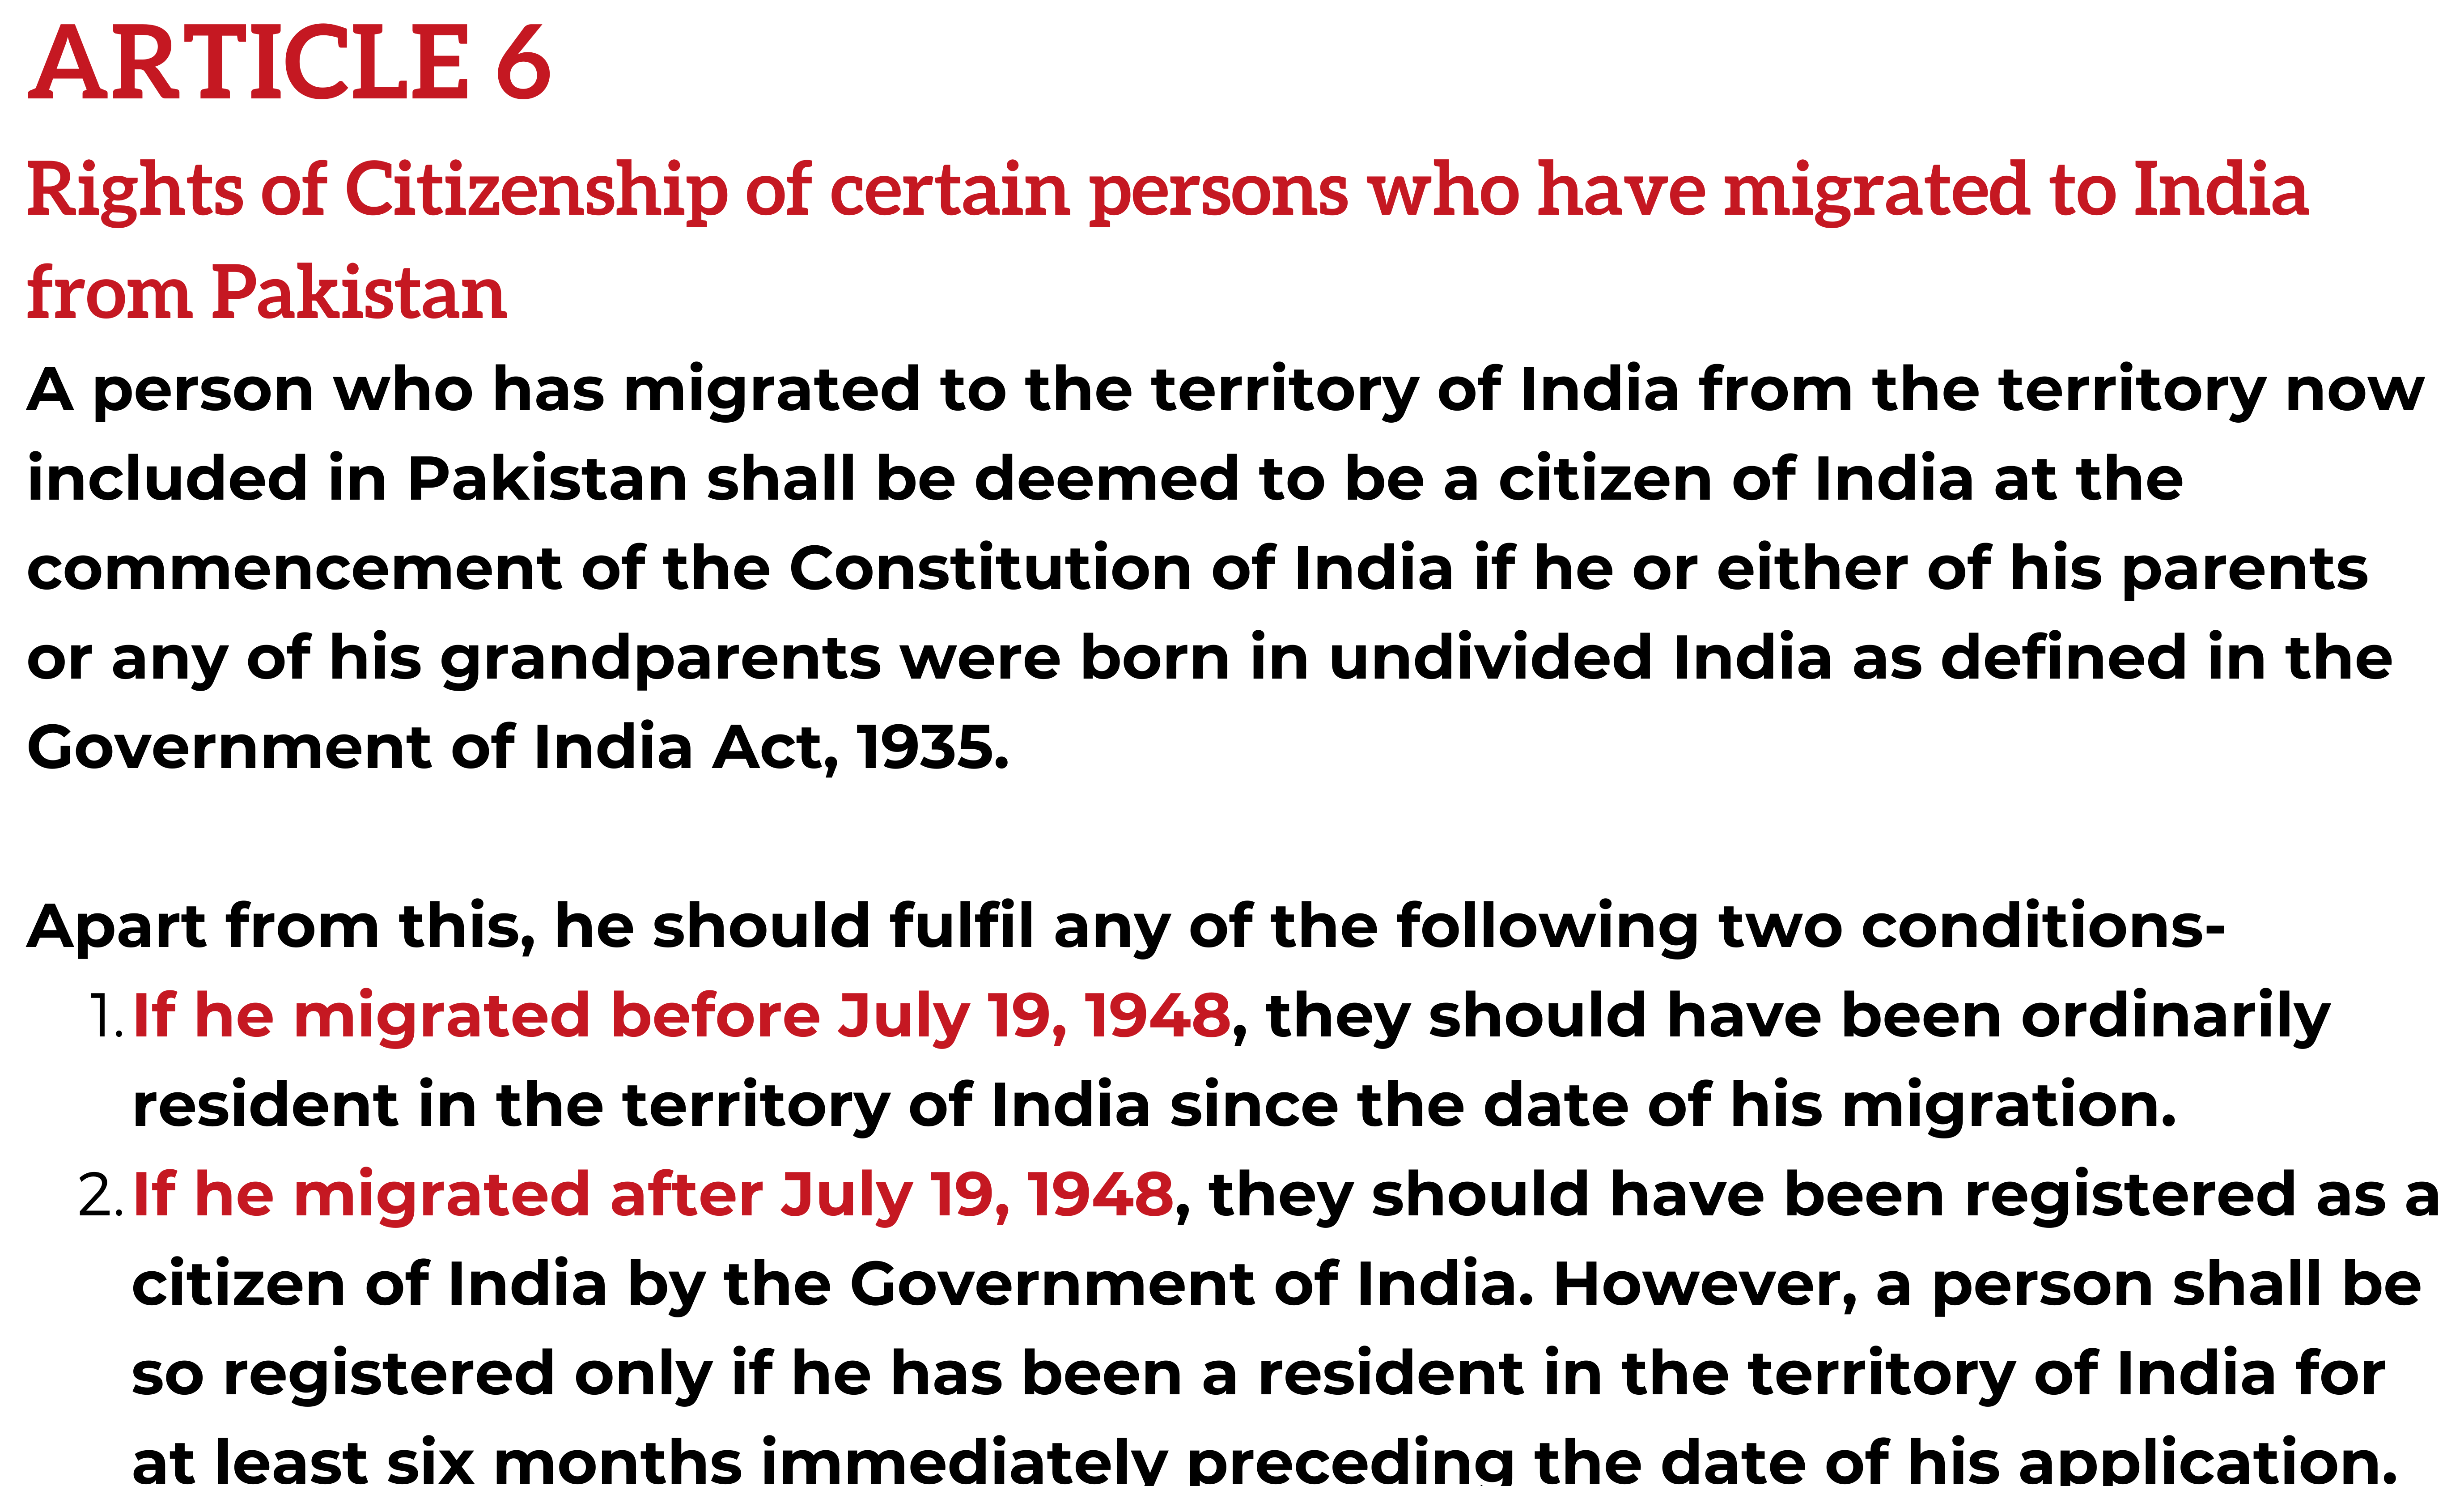 Article 6 of Indian Constitution